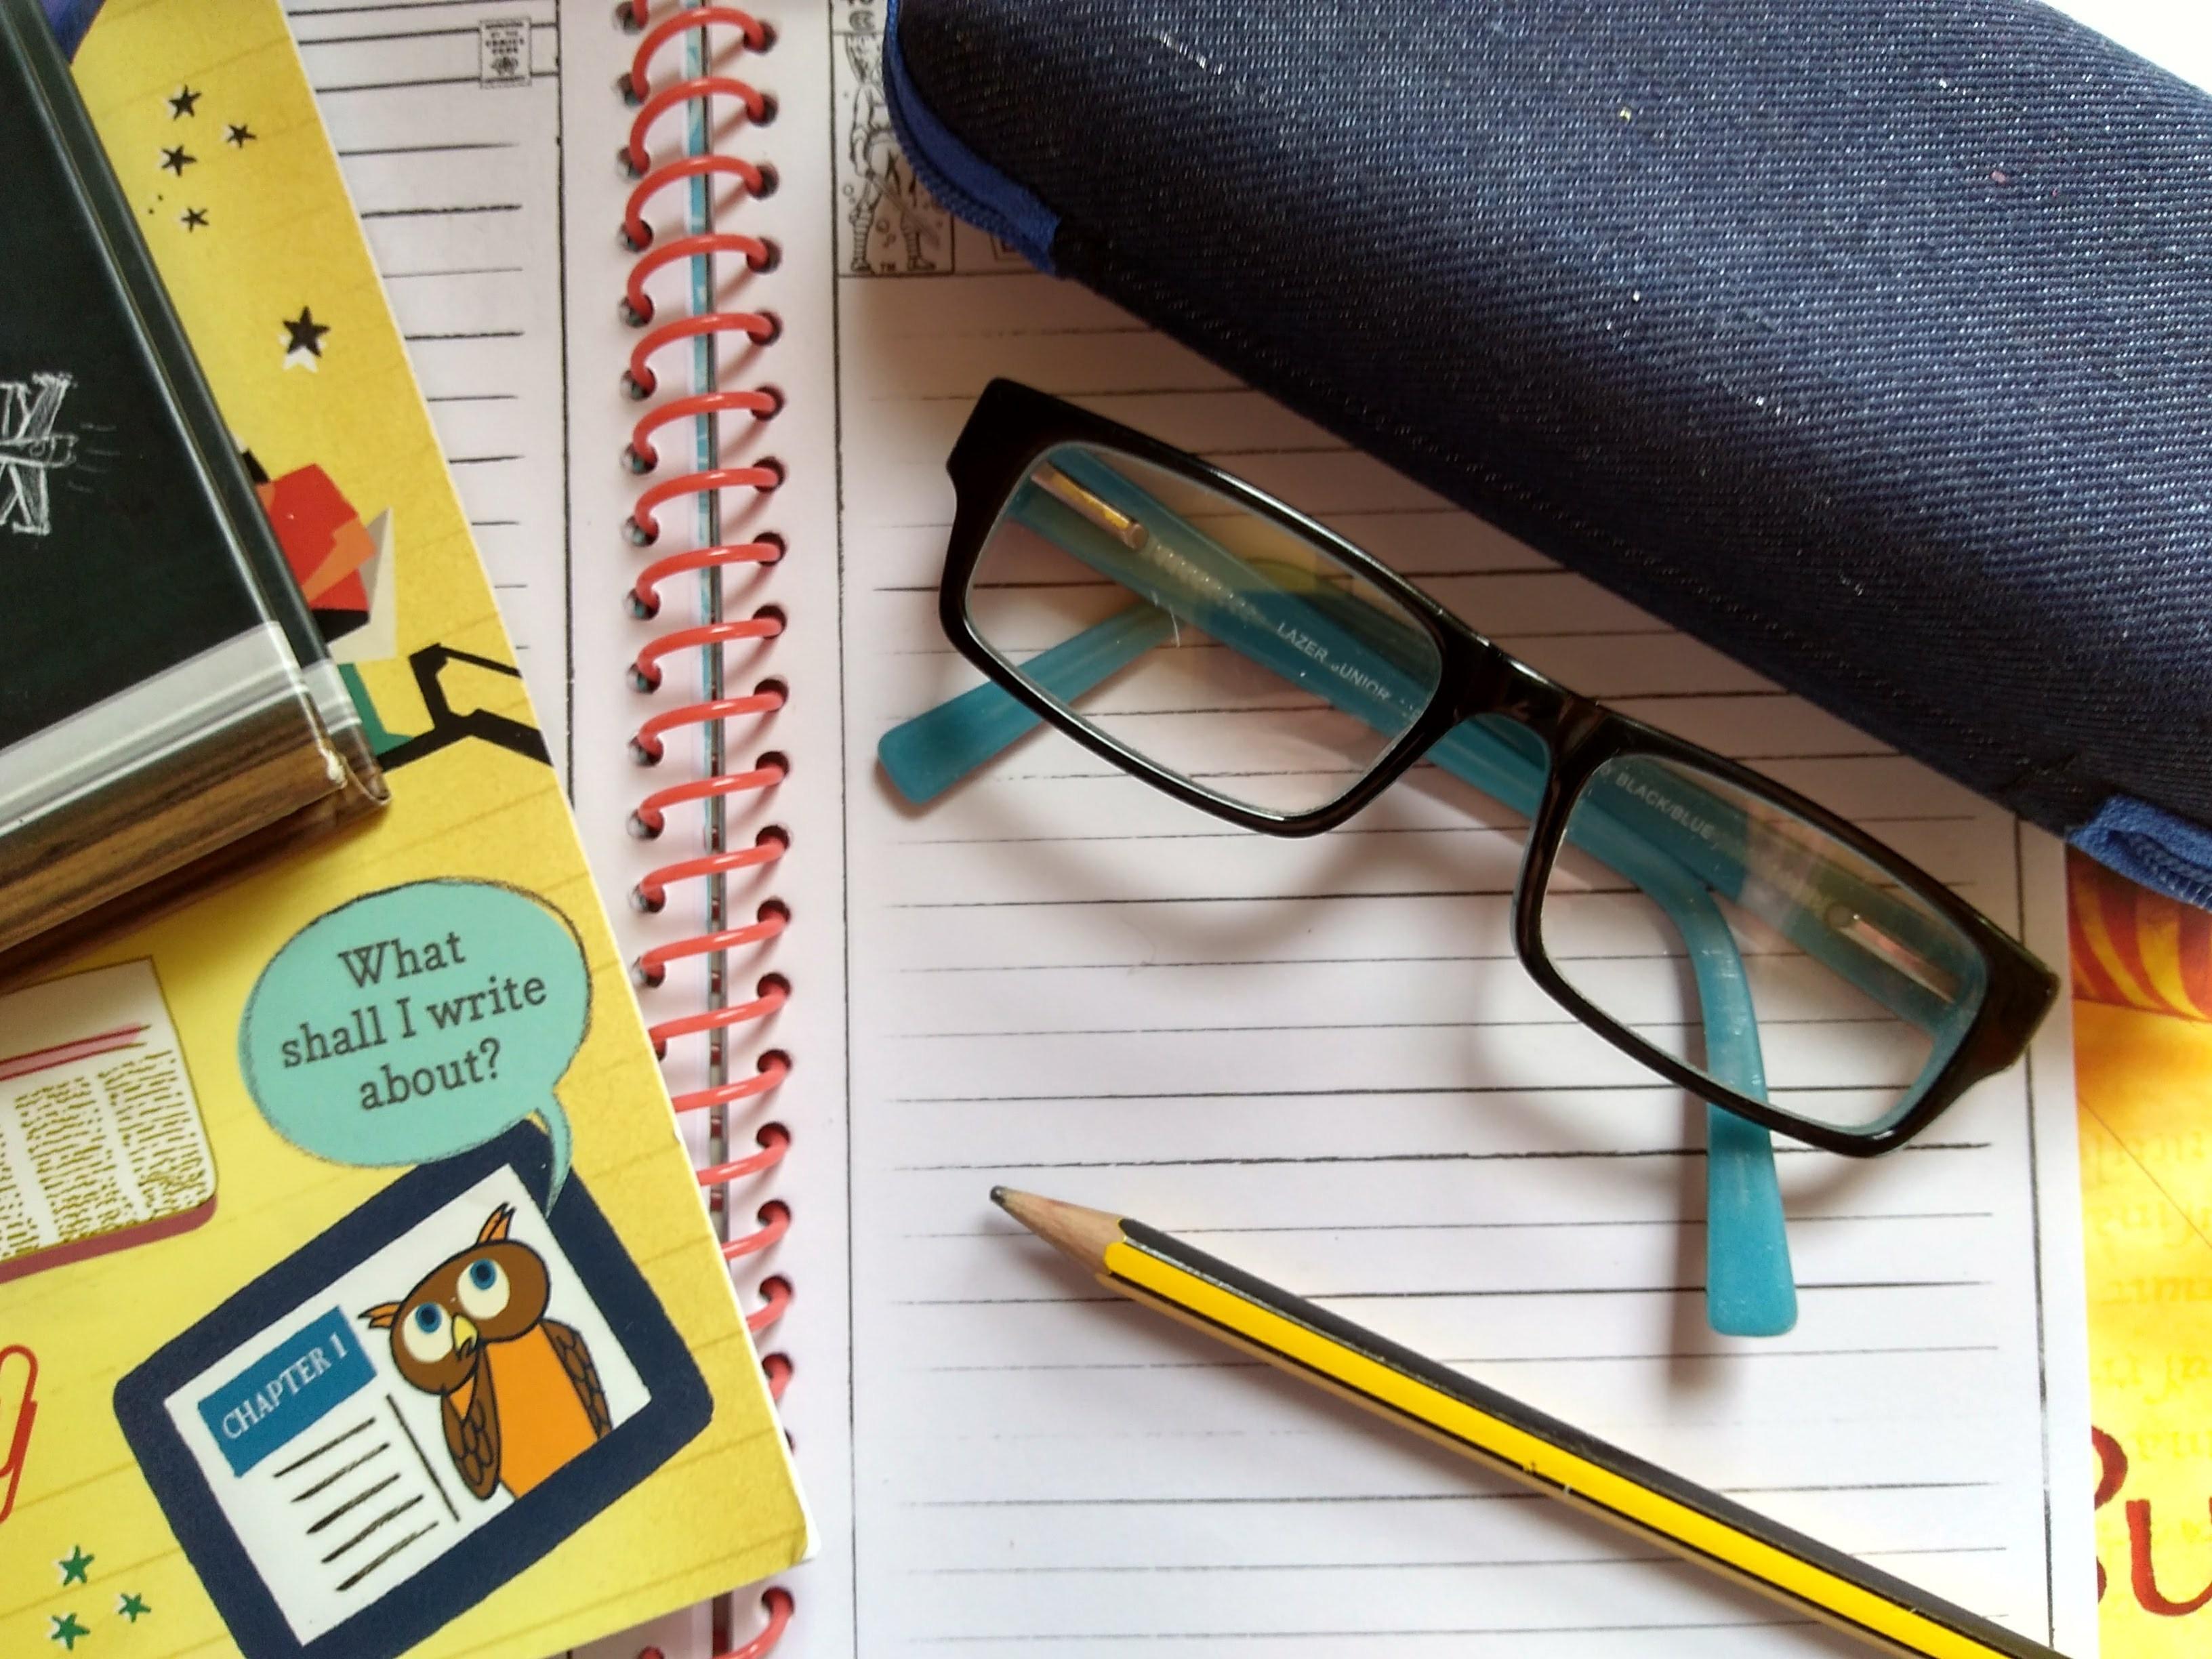 childrens-glasses-for-reading-resting-on-notebook-with-pencil-books-to-side